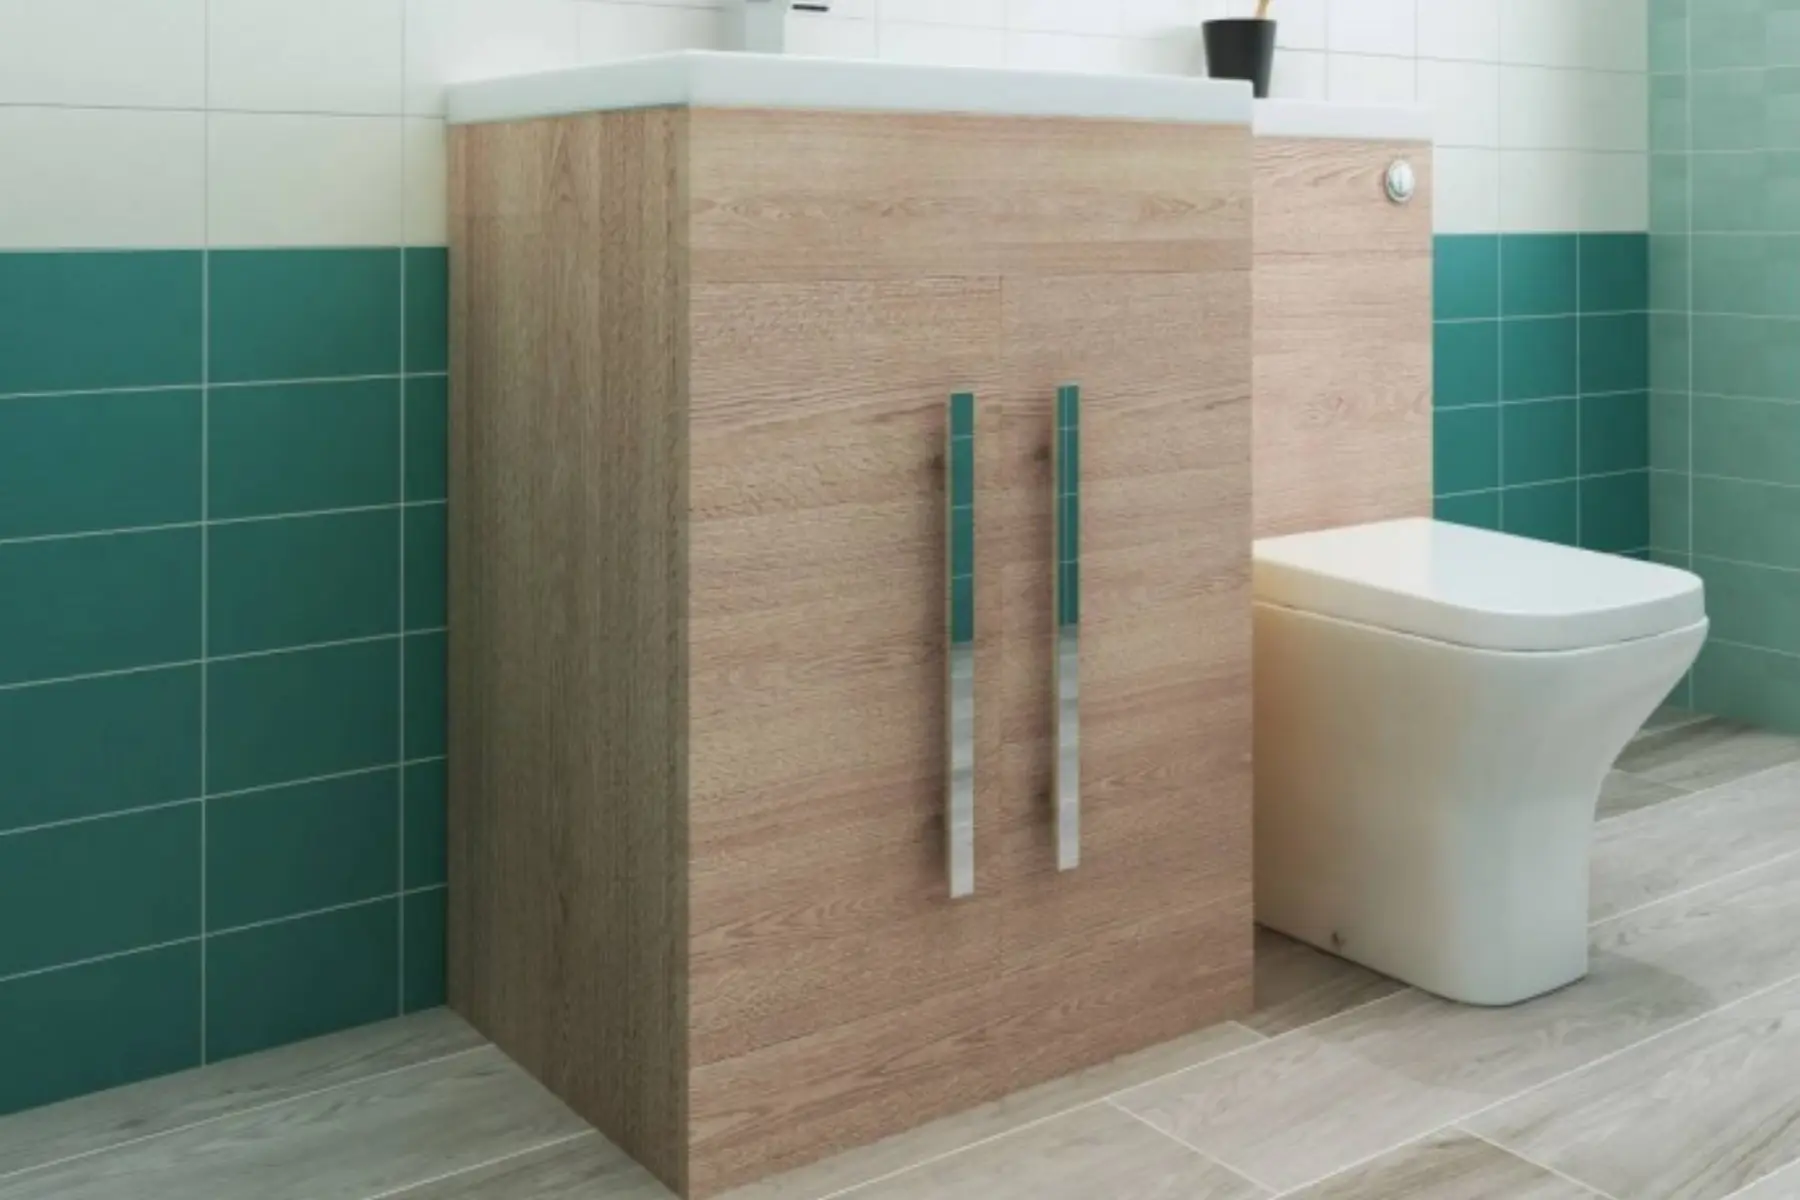 Combination Toilet And Basin Set In Bathroom